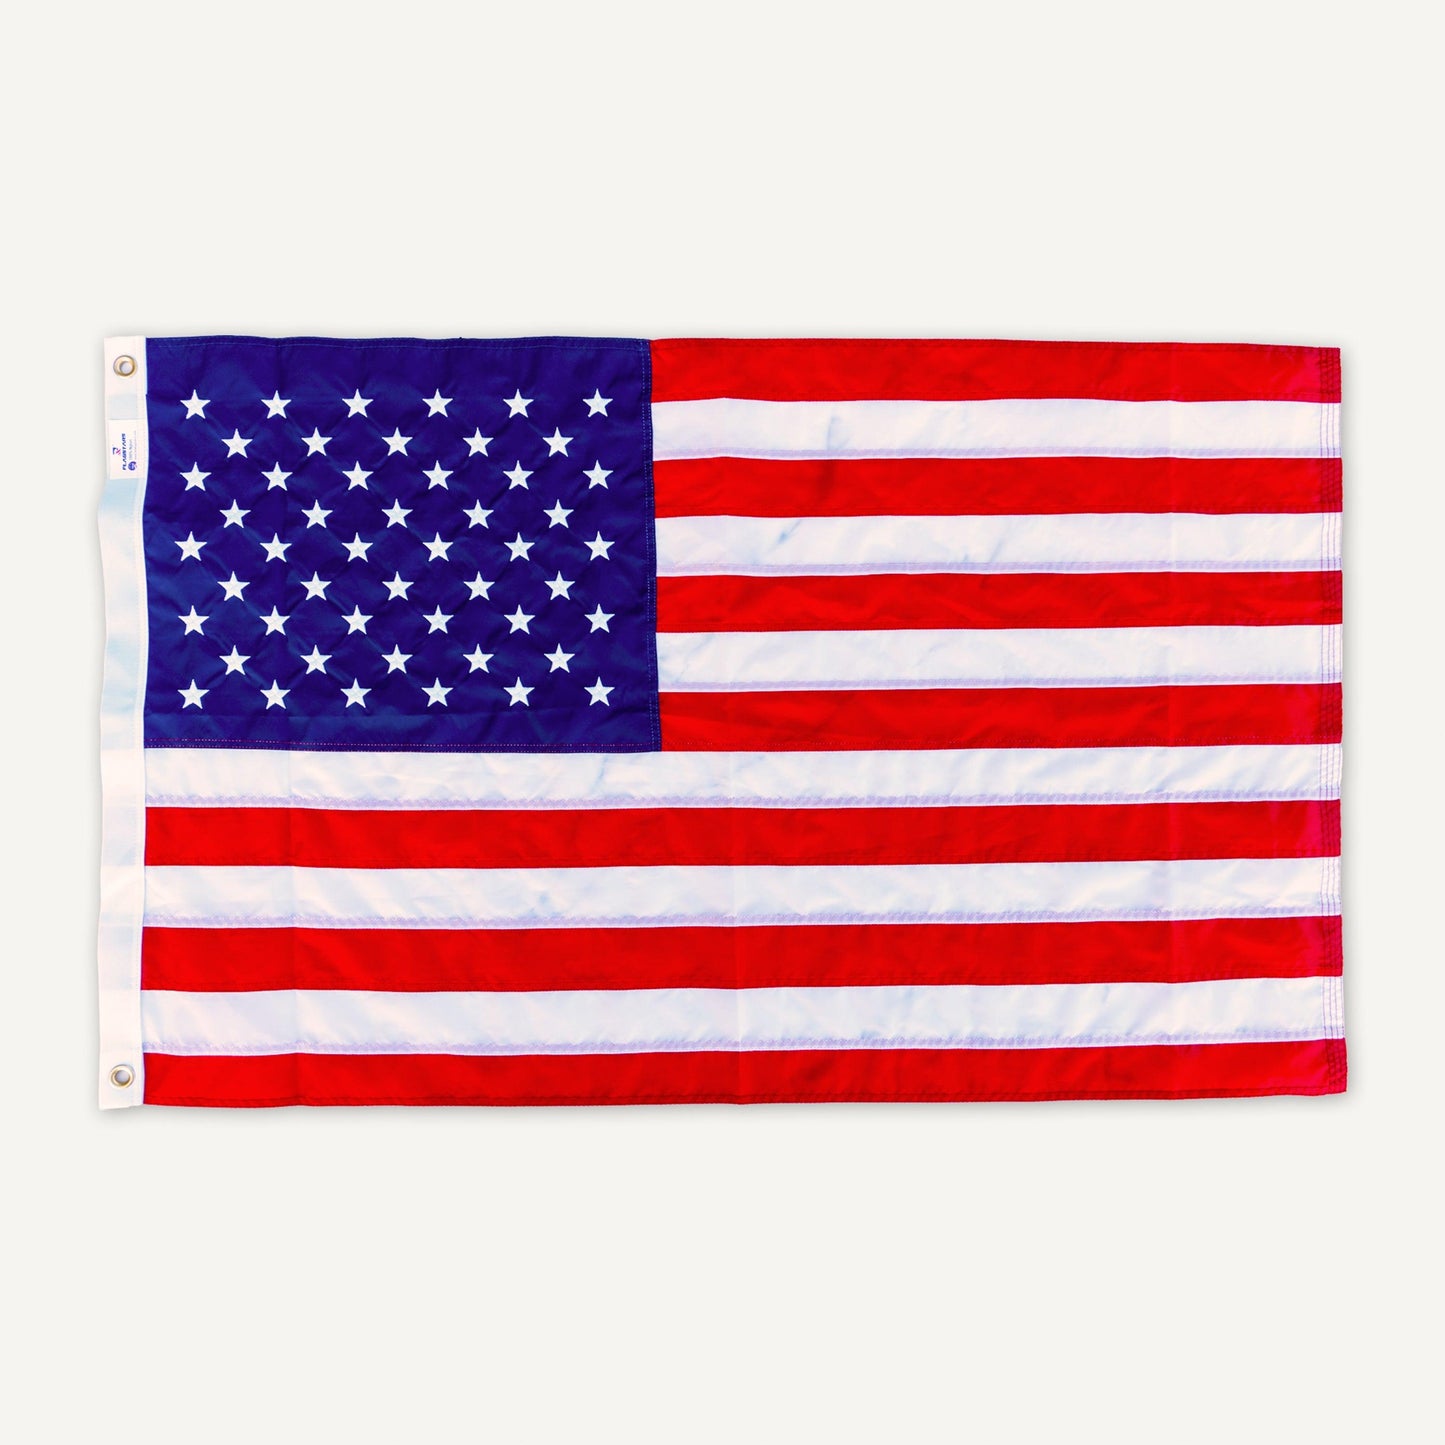 A long lasting 2.5' X 4' AMERICAN FLAG with 50 white stars on a blue background in the top left corner and 13 red and white alternating stripes, proudly made in the USA by The FlagStars.